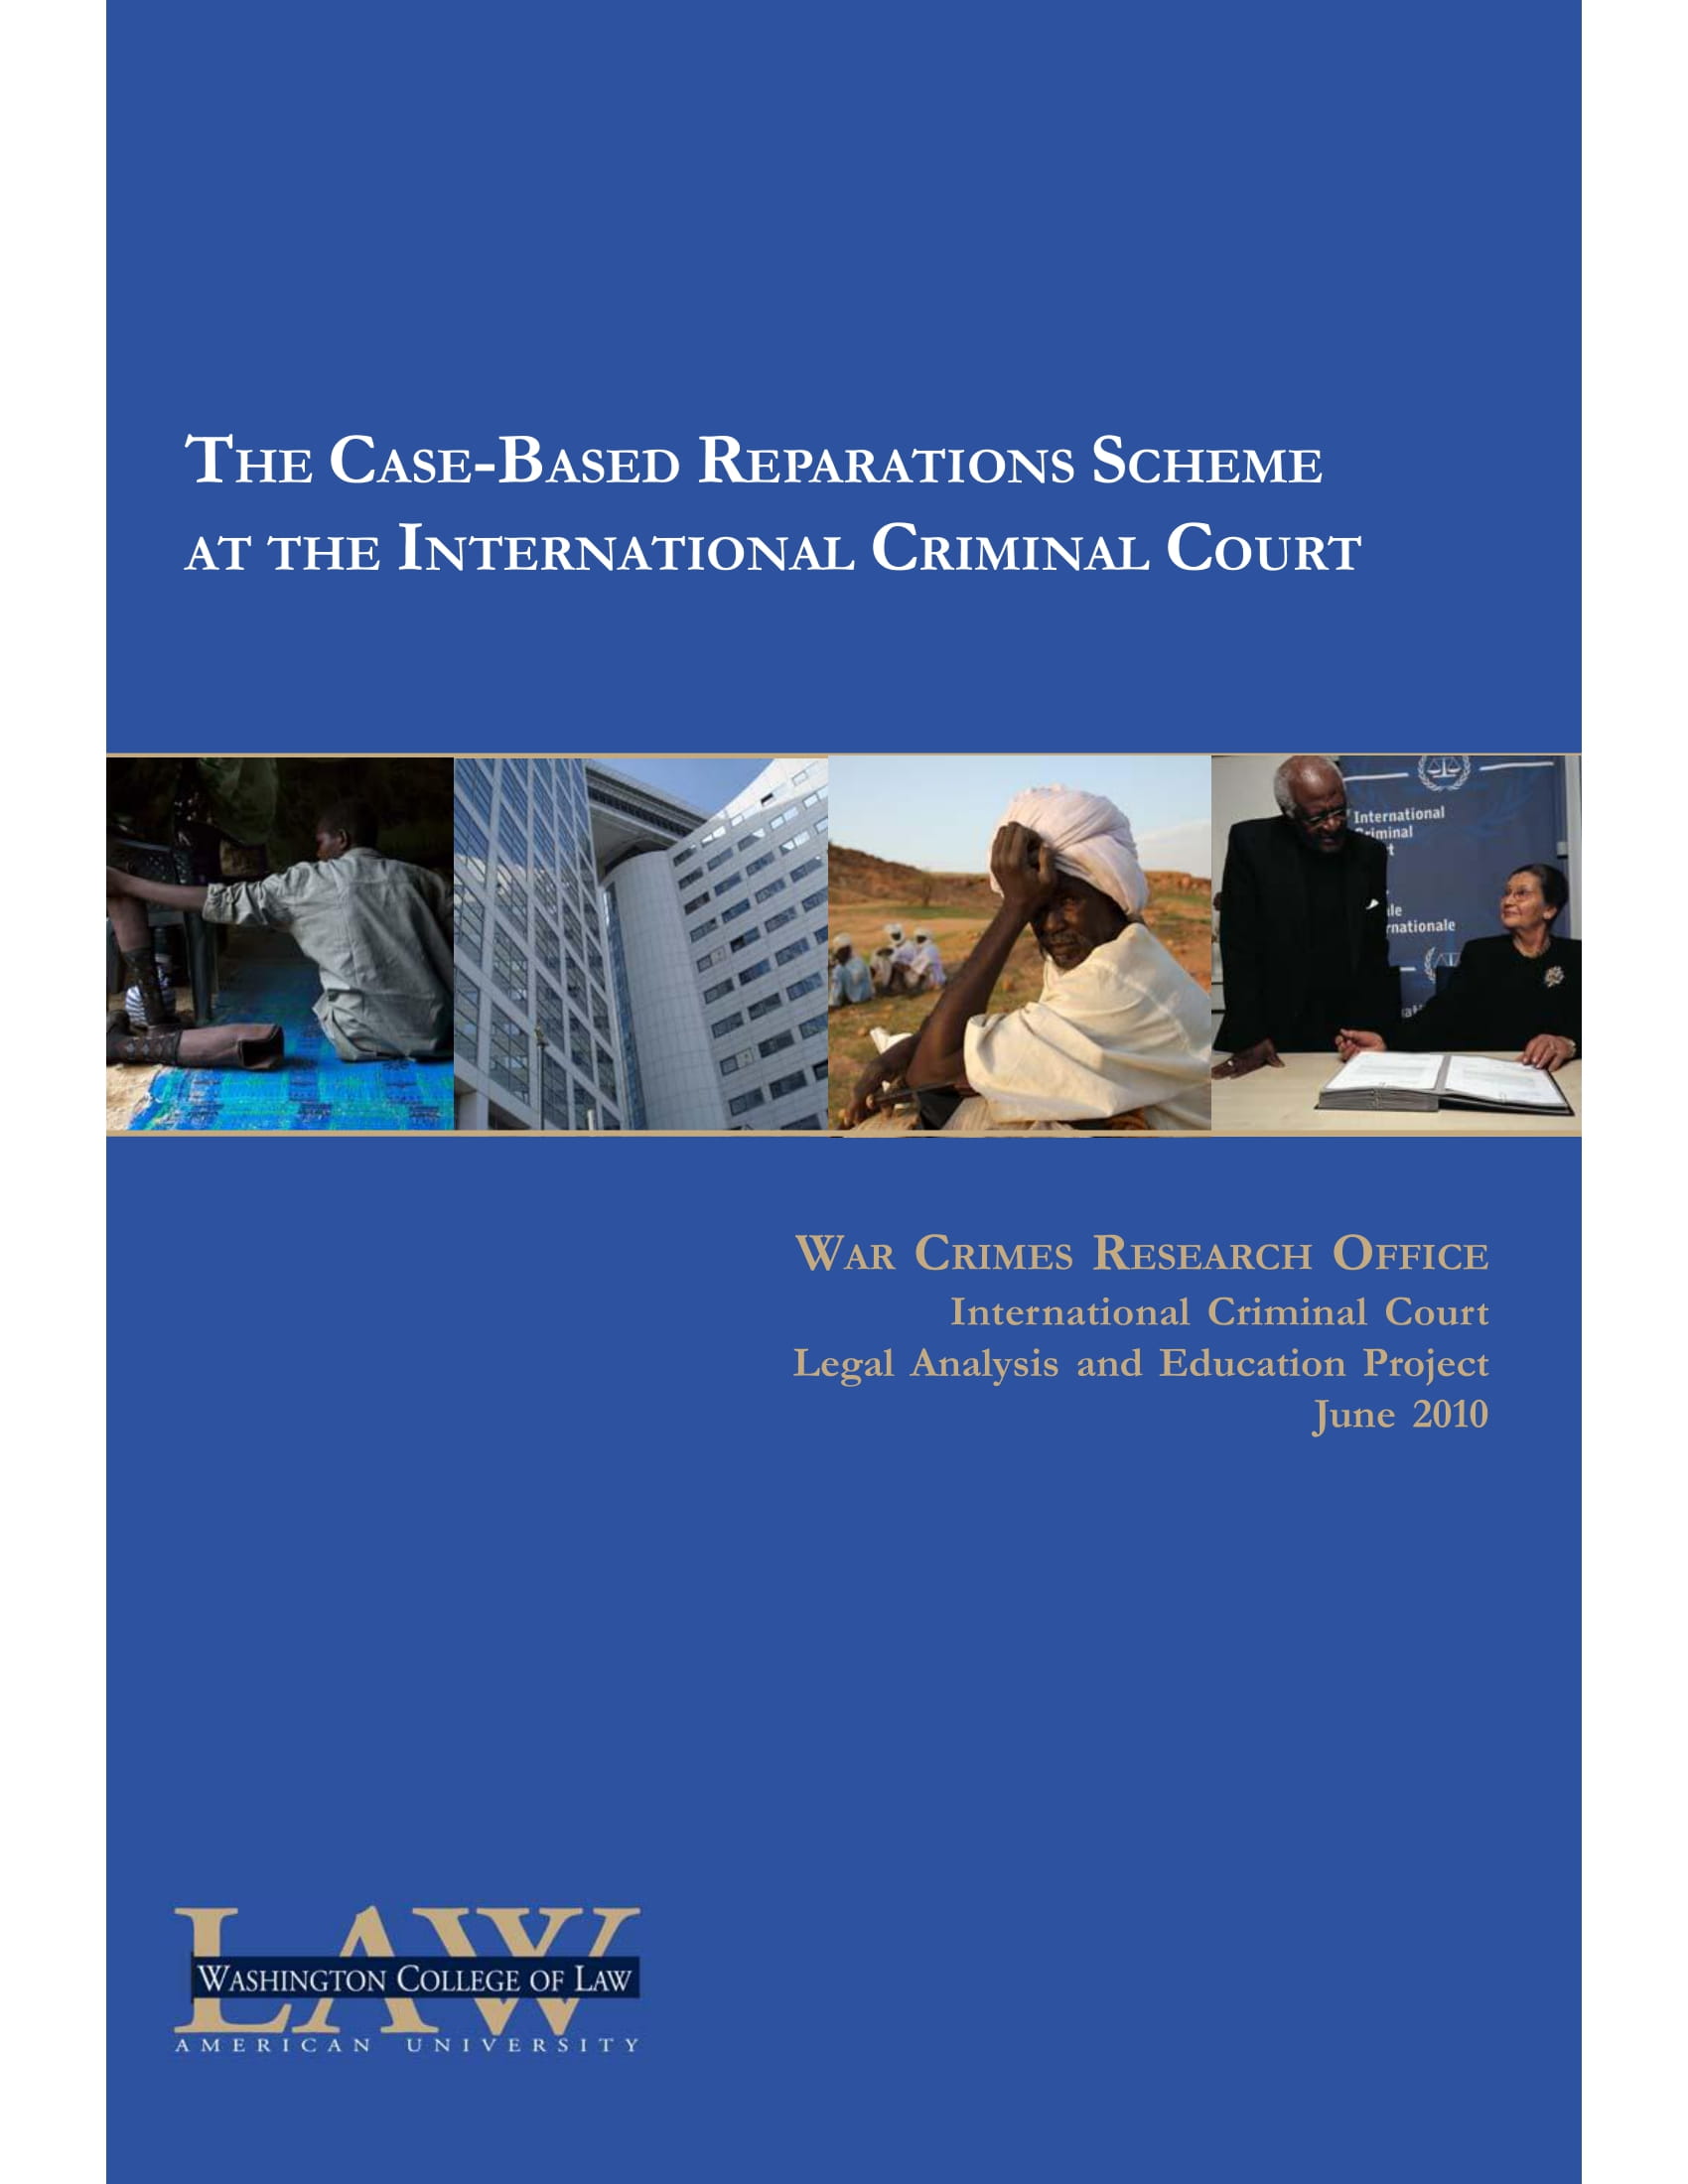 Report 12: The Case-Based Reparations Scheme at the International Criminal Court